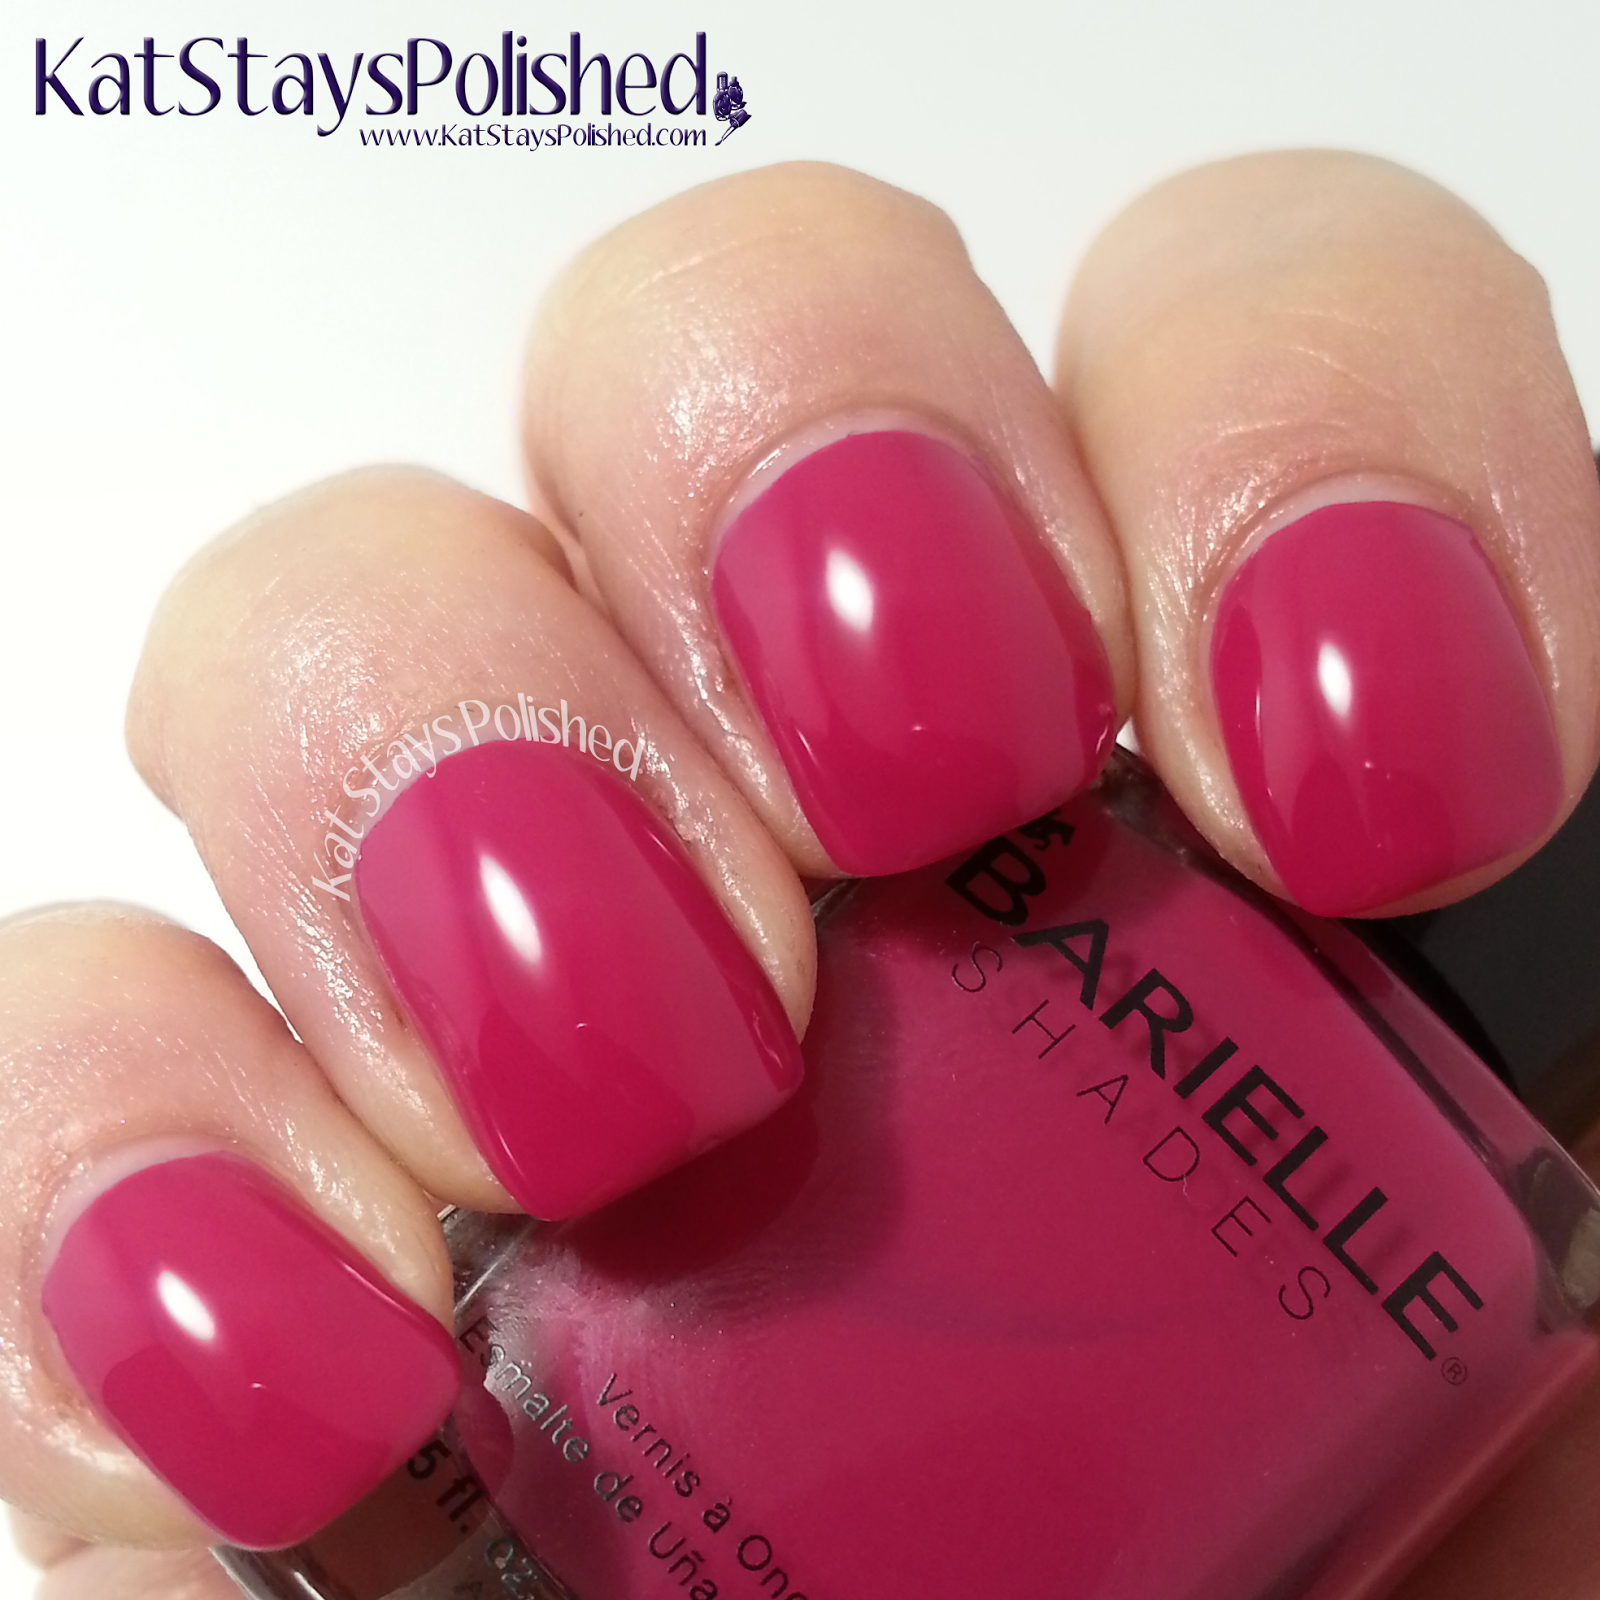 Barielle Me Couture - Berry Posh | Kat Stays Polished